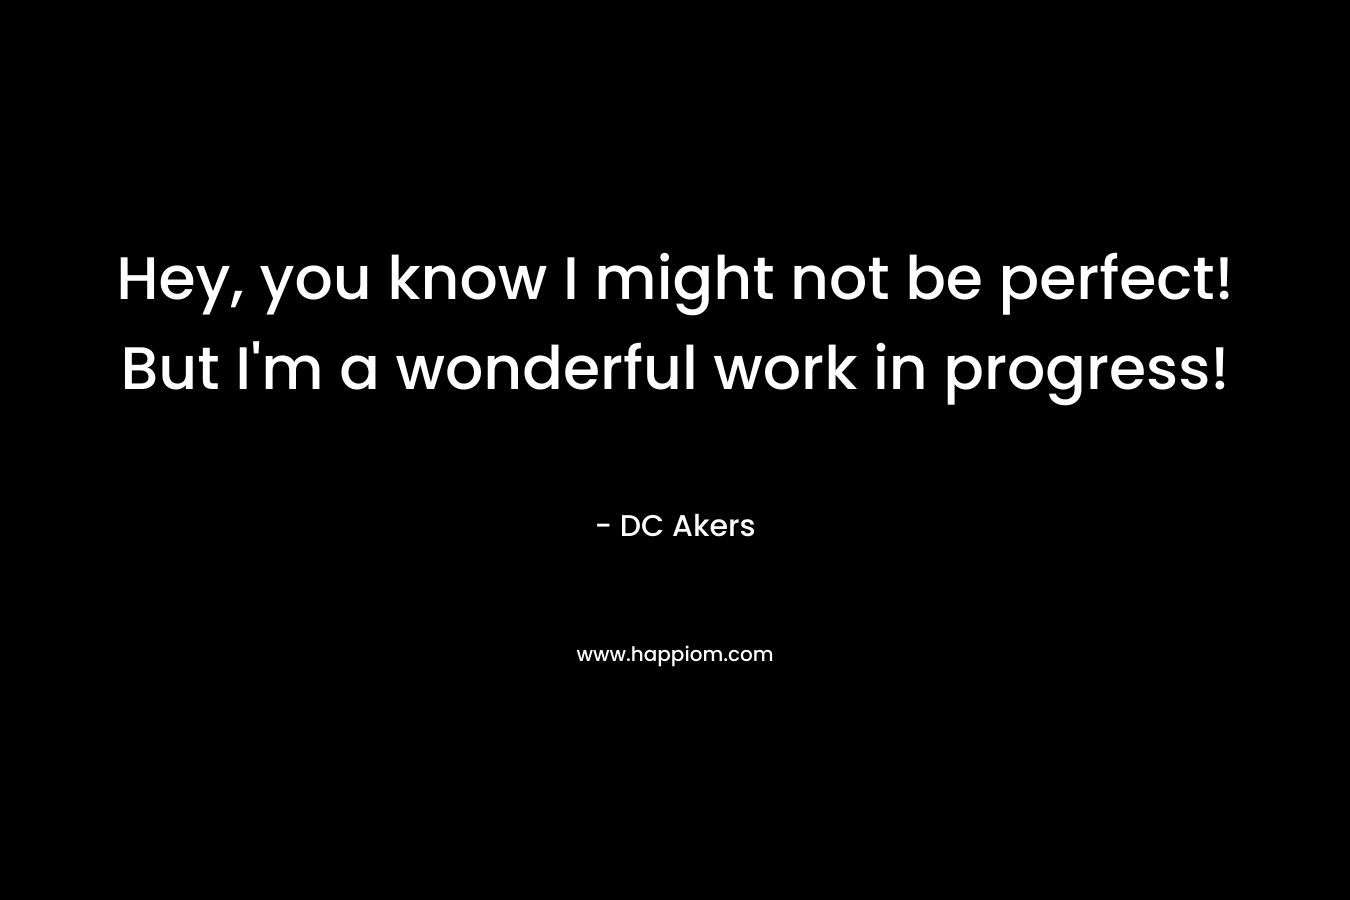 Hey, you know I might not be perfect! But I’m a wonderful work in progress! – DC Akers